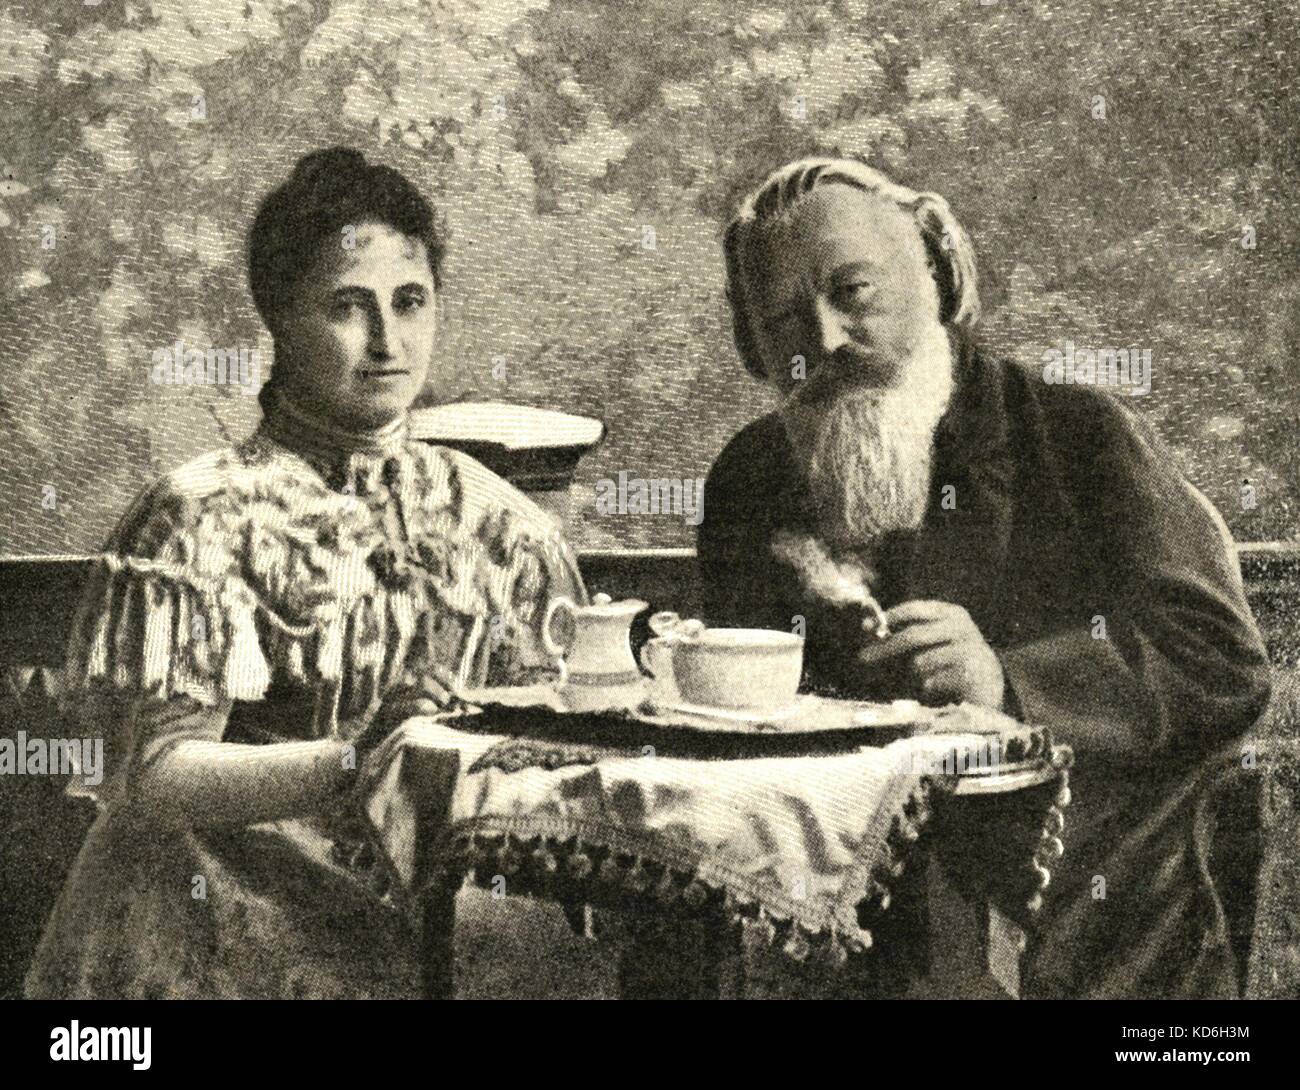 Johann Strauss II's wife Adèle with Brahms at Ischl. Strauss II: Austrian composer, conductor & violinist (1825-1899). Brahms: German composer, 1833-1897 Stock Photo